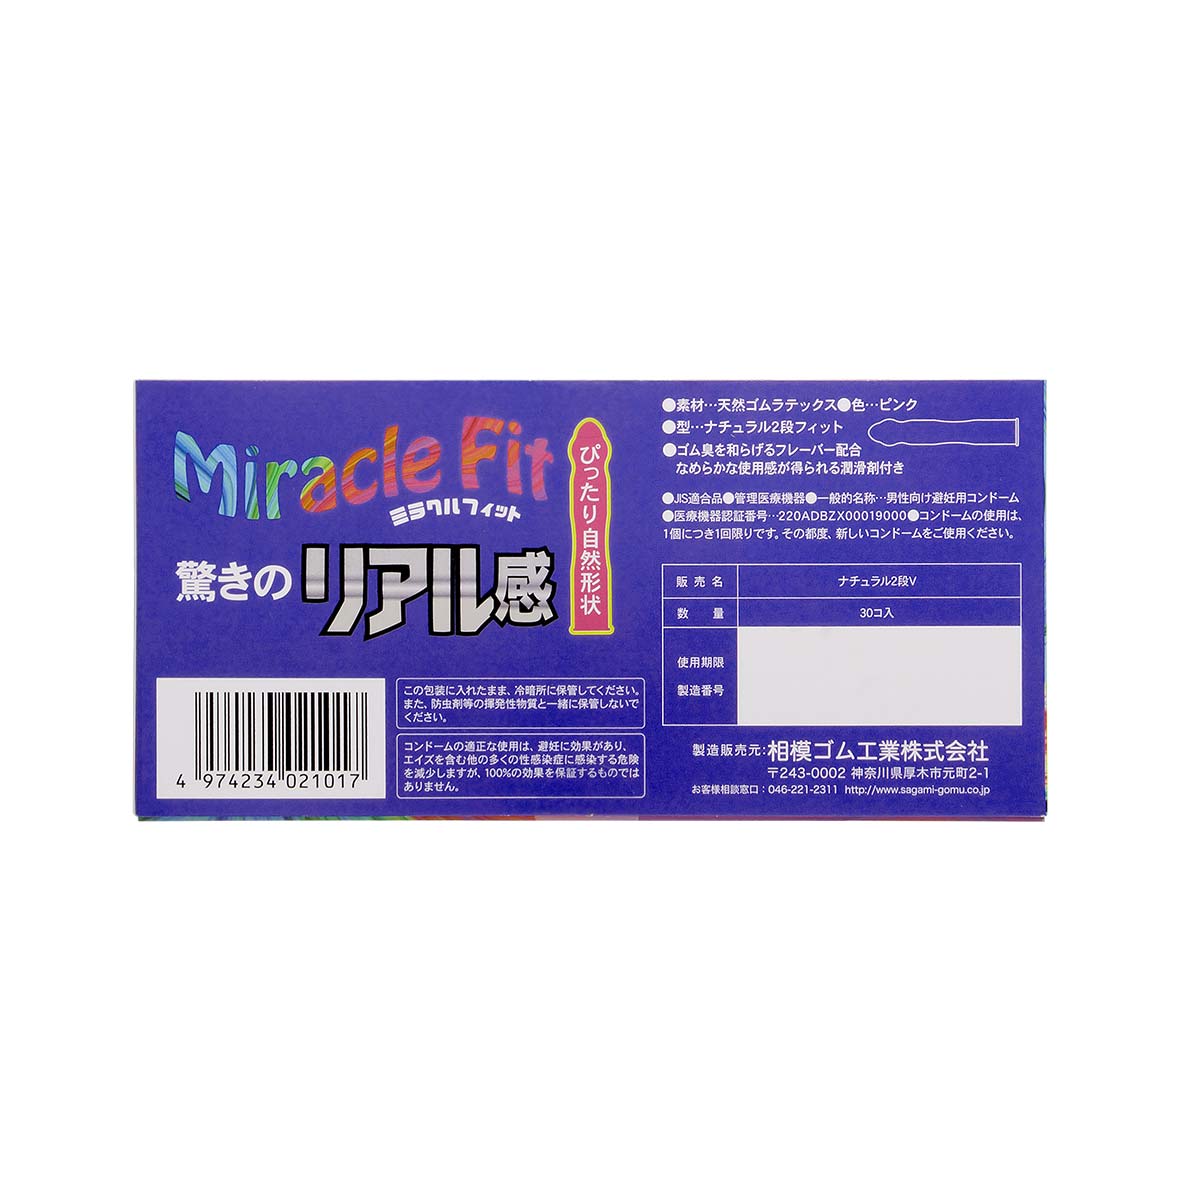 Sagami Miracle Fit 51mm 30's Pack Latex Condom-p_3